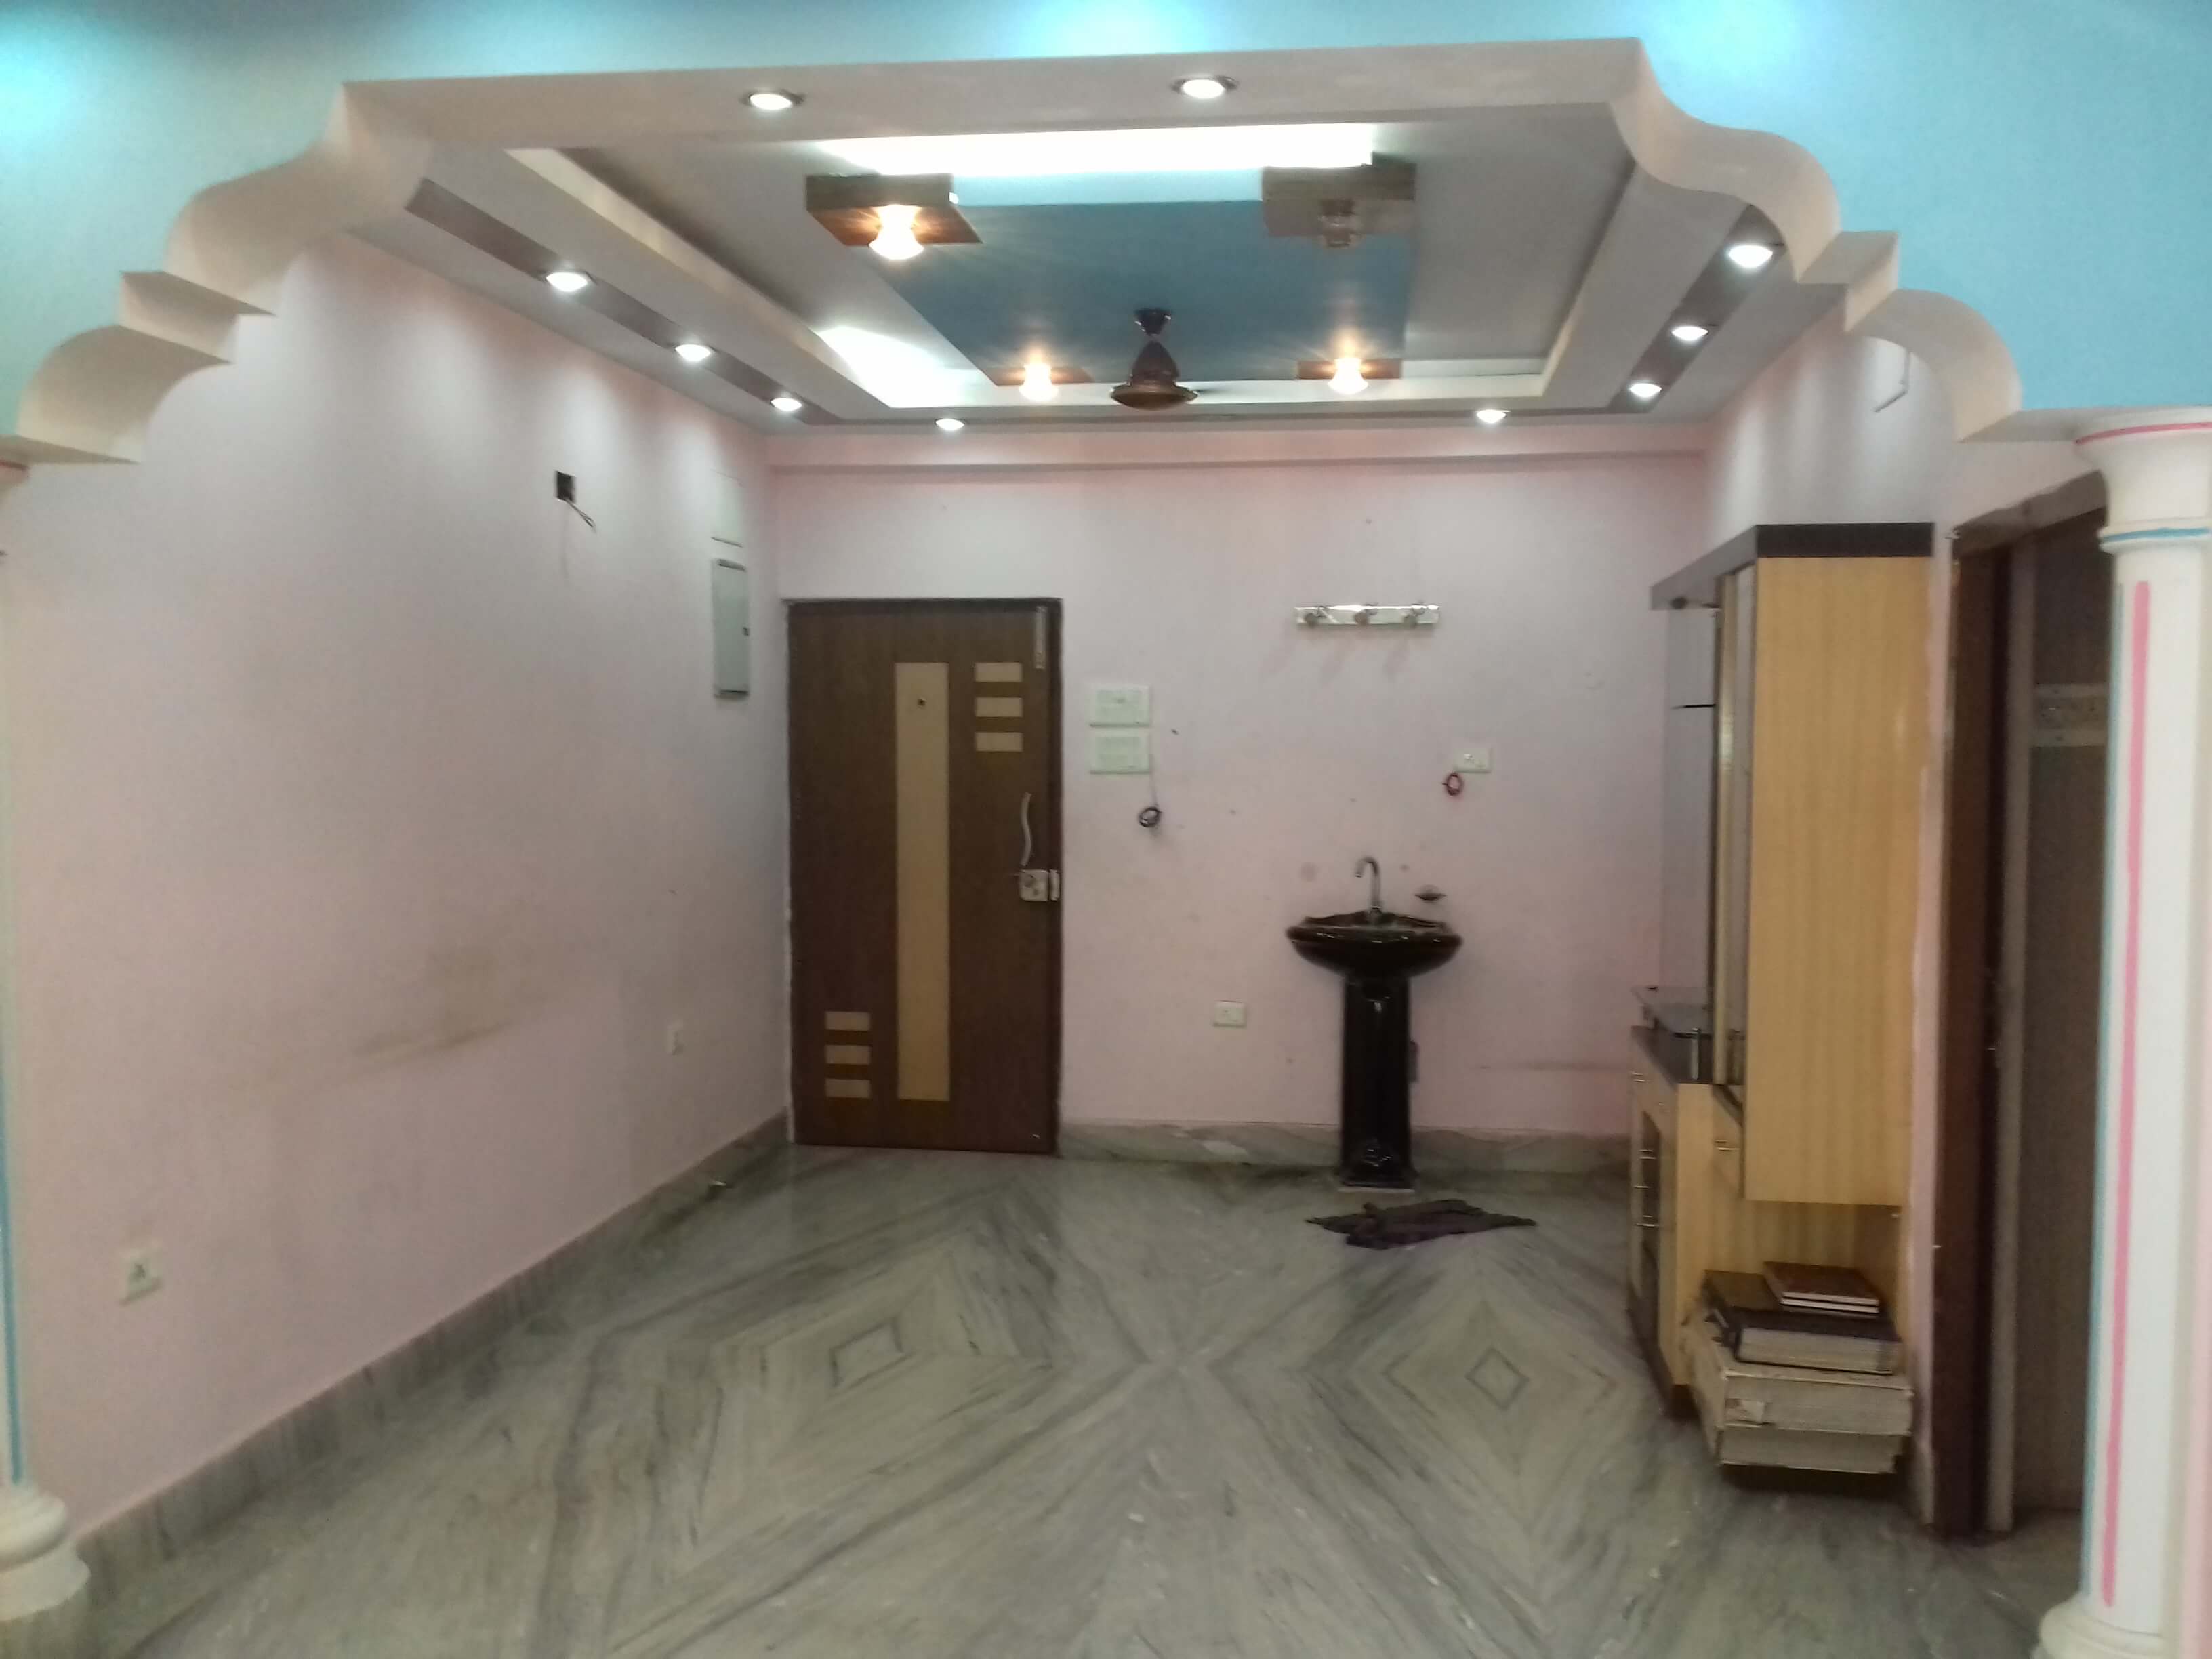 Flat For Rent in Nager Bazar Kolkata (Id: 9975)